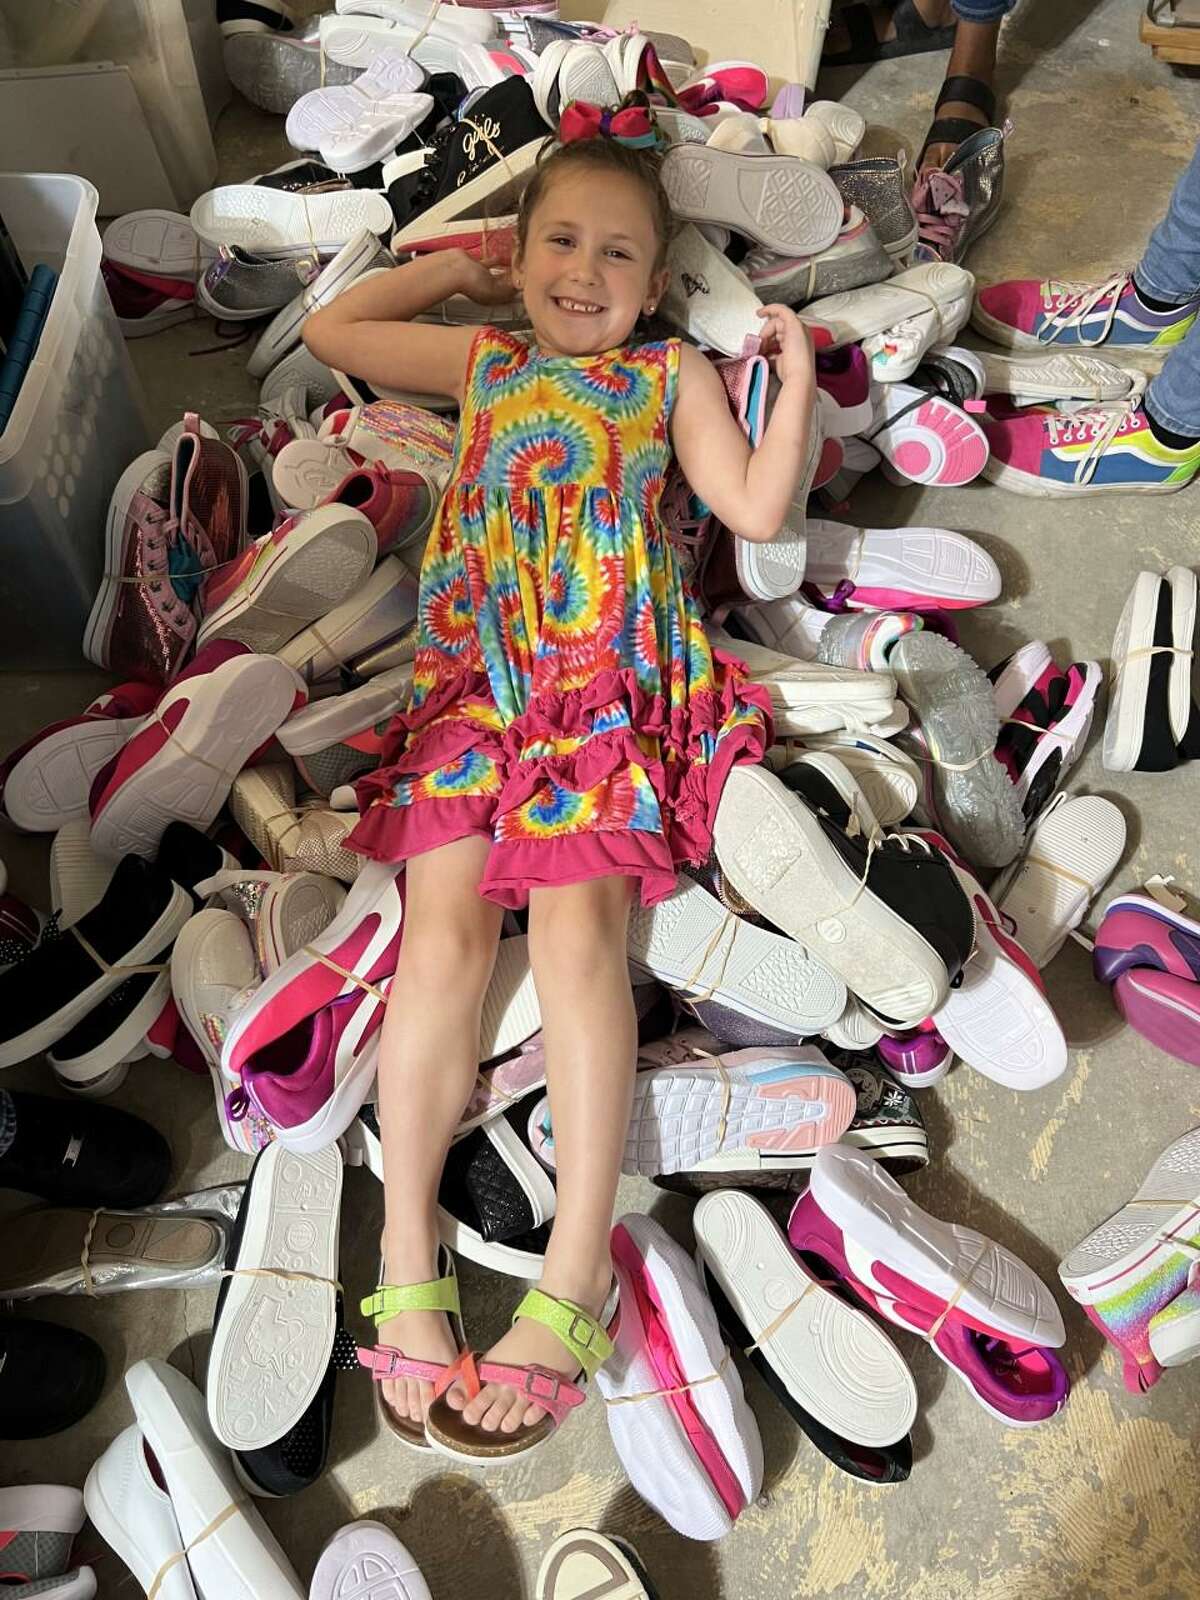 Thomas, 5, takes a break from her volunteer duties at sole Mission to have some fun in the shoes. Makynlee volunteers to help others in many ways.